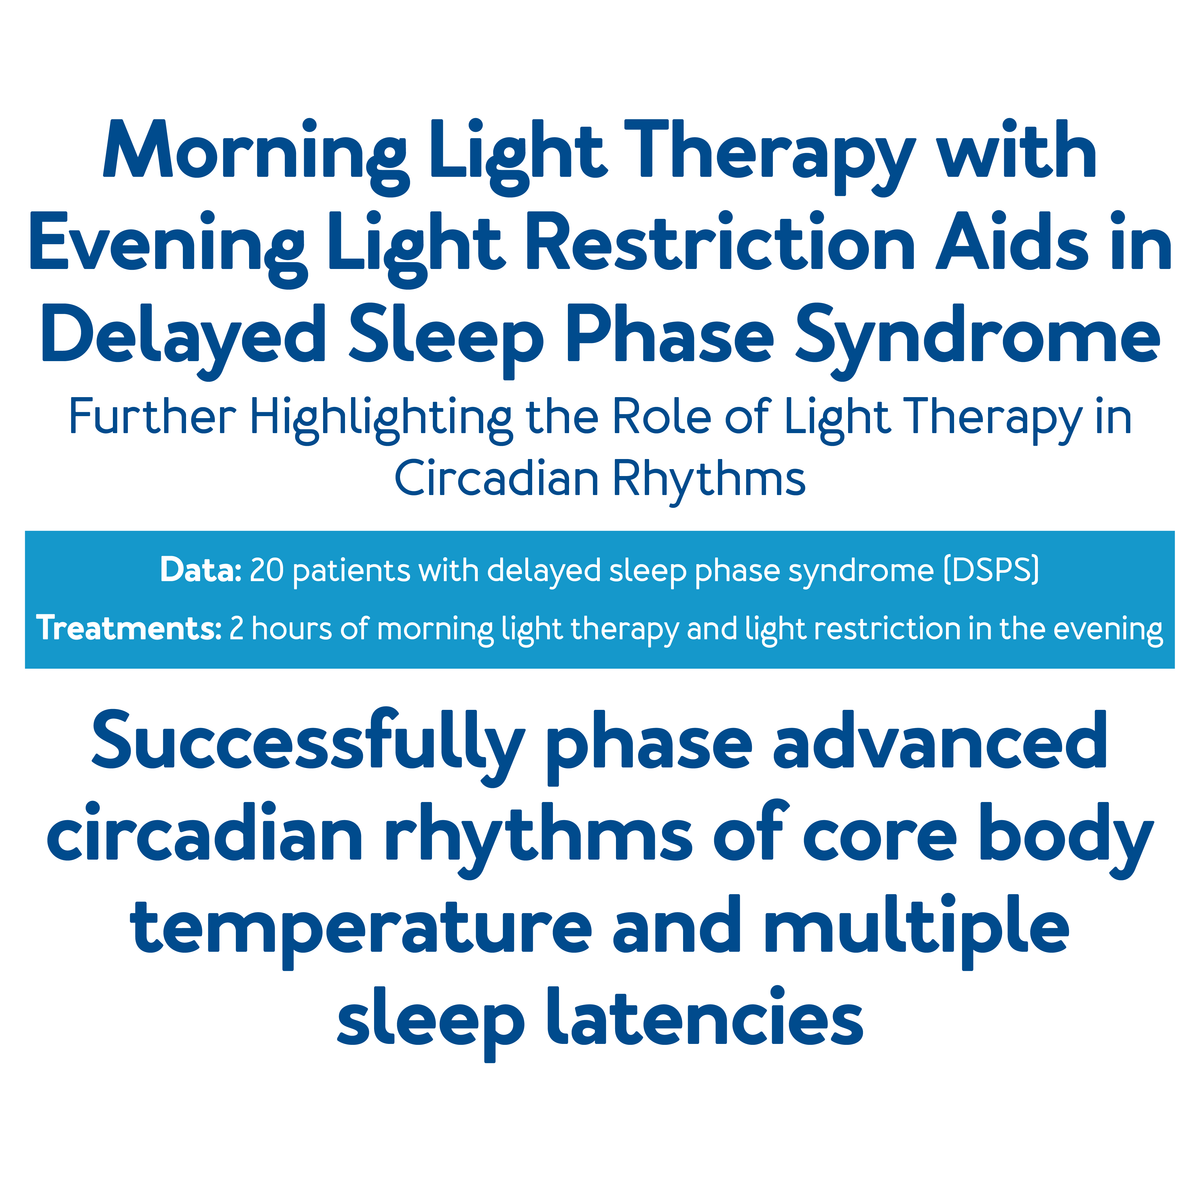 Morning Light Therapy with Evening Light Restriction Aids, further details are provided below.